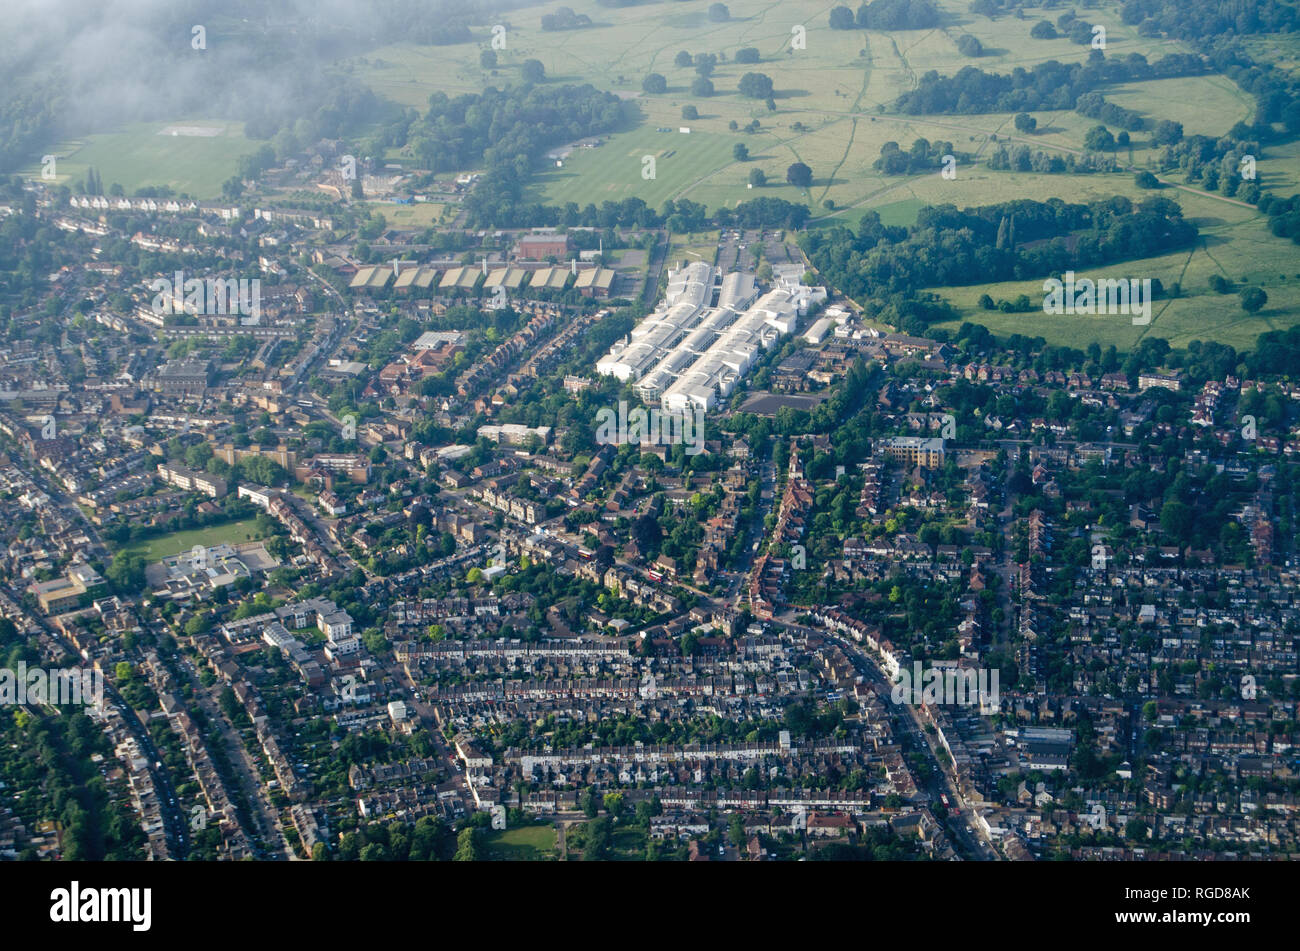 Aerial view of Teddington, Middlesex in the London Borough of Richmond Upon Thames in West London.  The long white building is the National Physical L Stock Photo